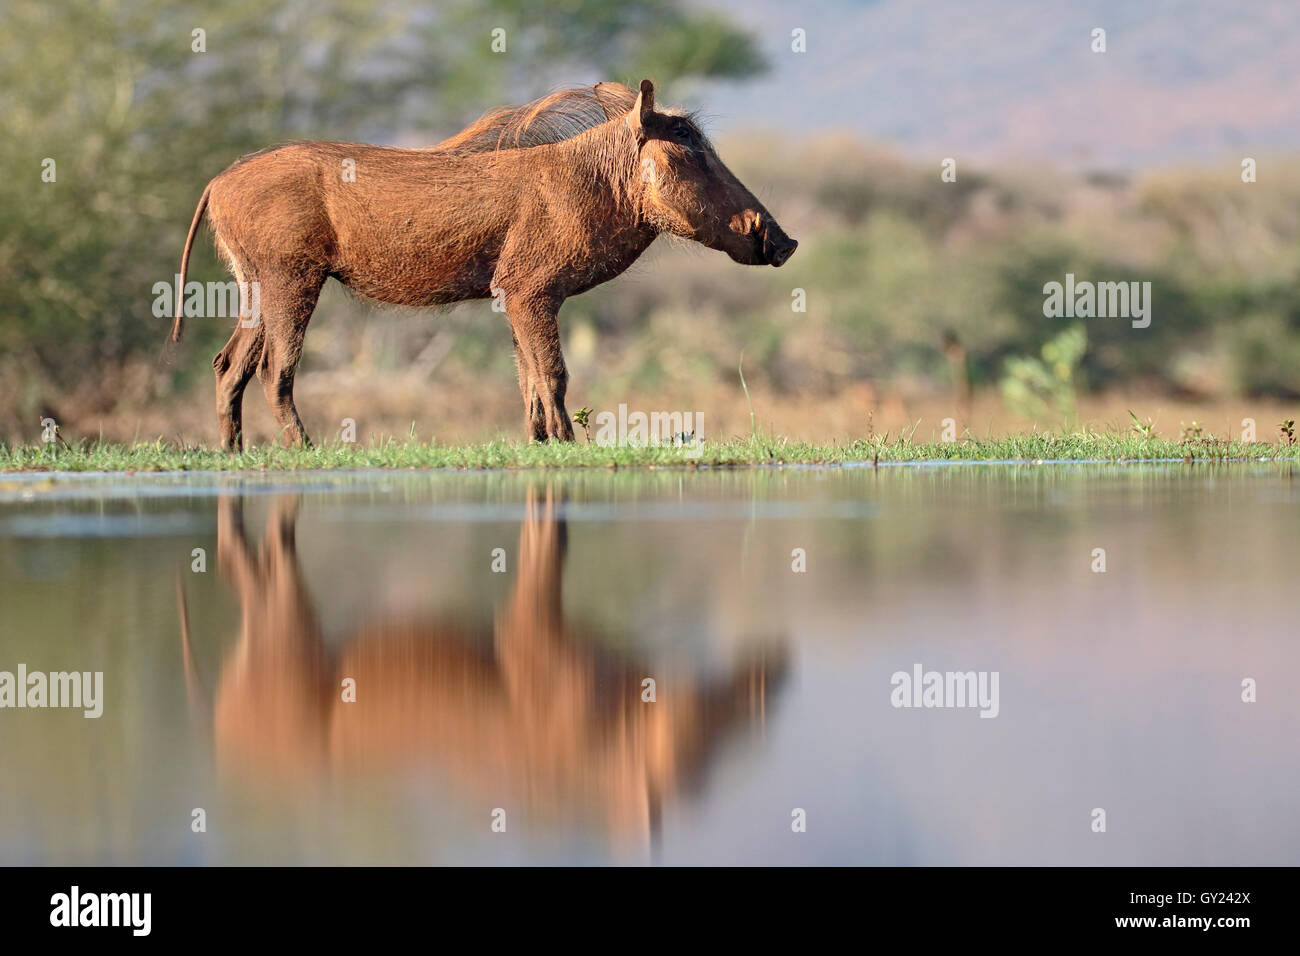 Warthog, Phacochoerus aethiopicus, single mammal by water, South Africa, August 2016 Stock Photo